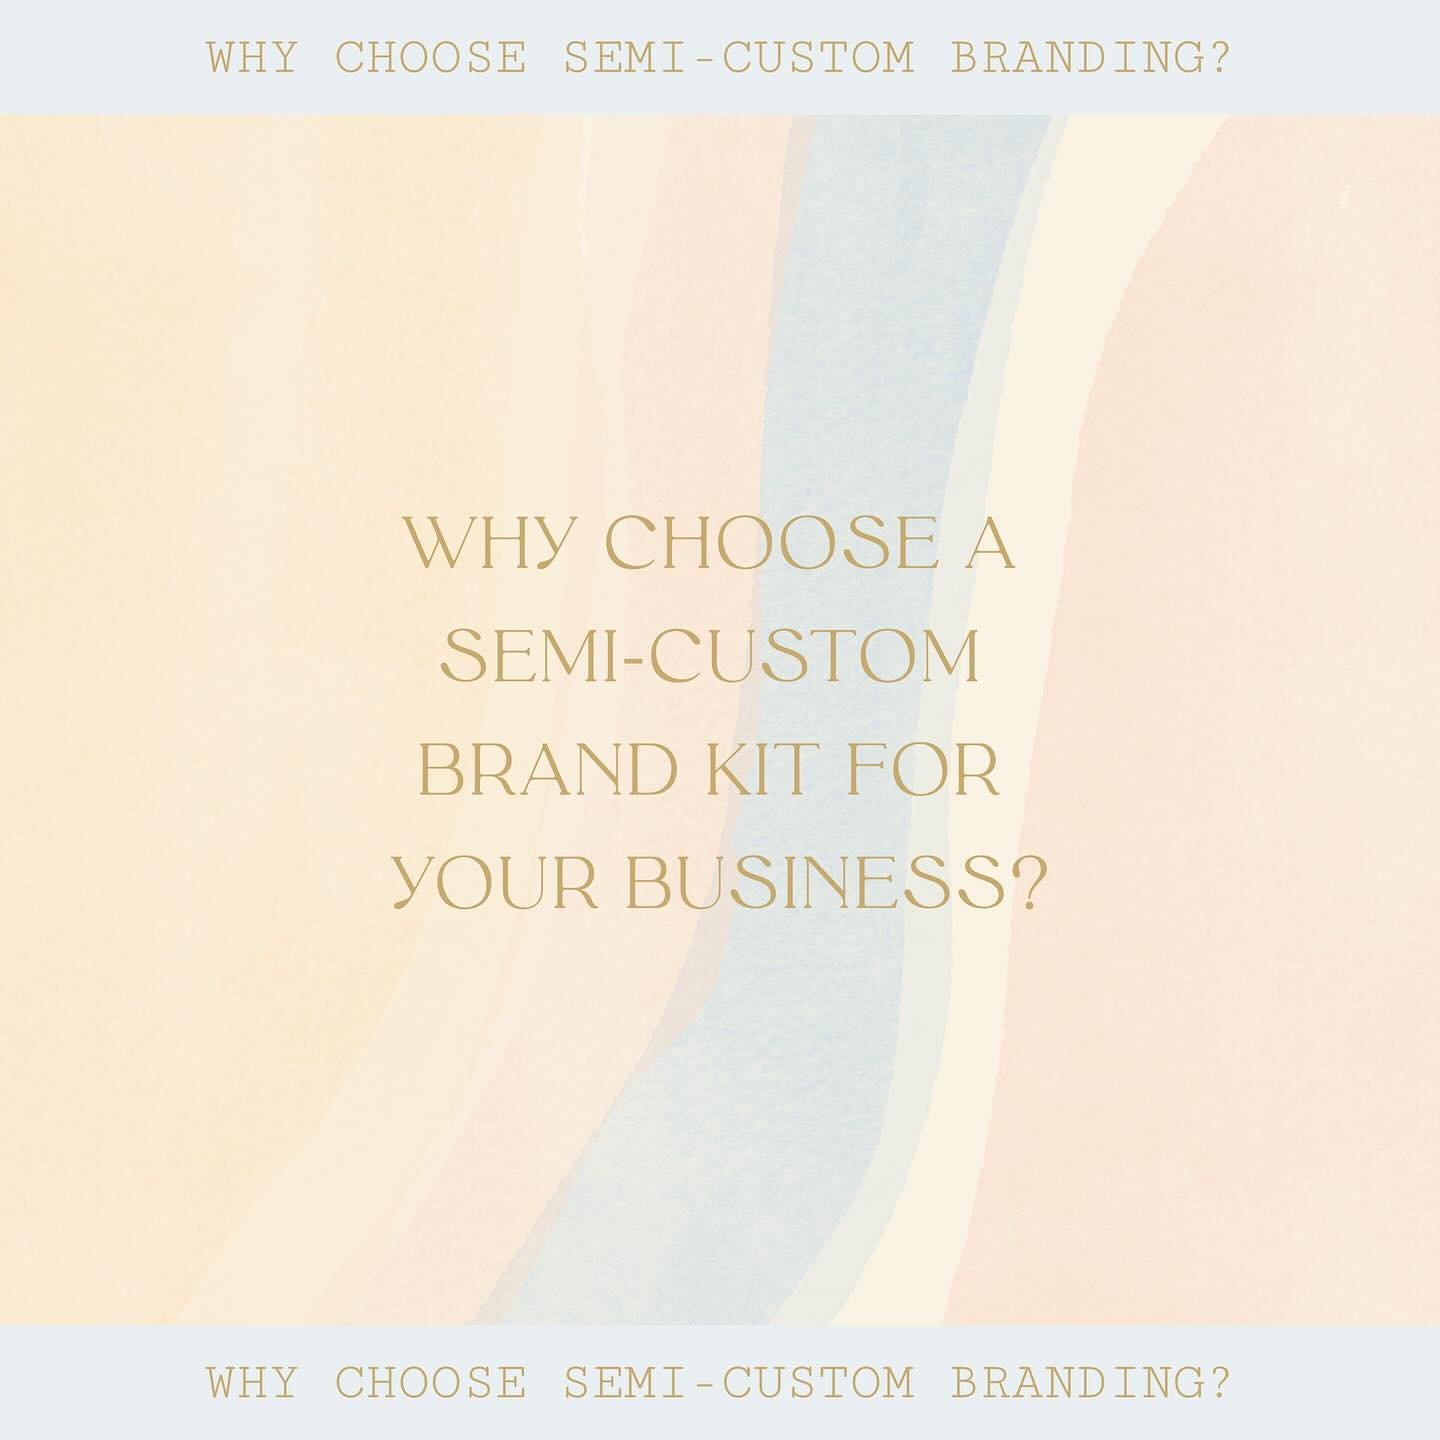 A little run down on why a semi-custom brand might be a great choice for you and your biz right now! We currently have a special offer of $50 off. Use code BLUSH50 at checkout. Offer ending soon ✨